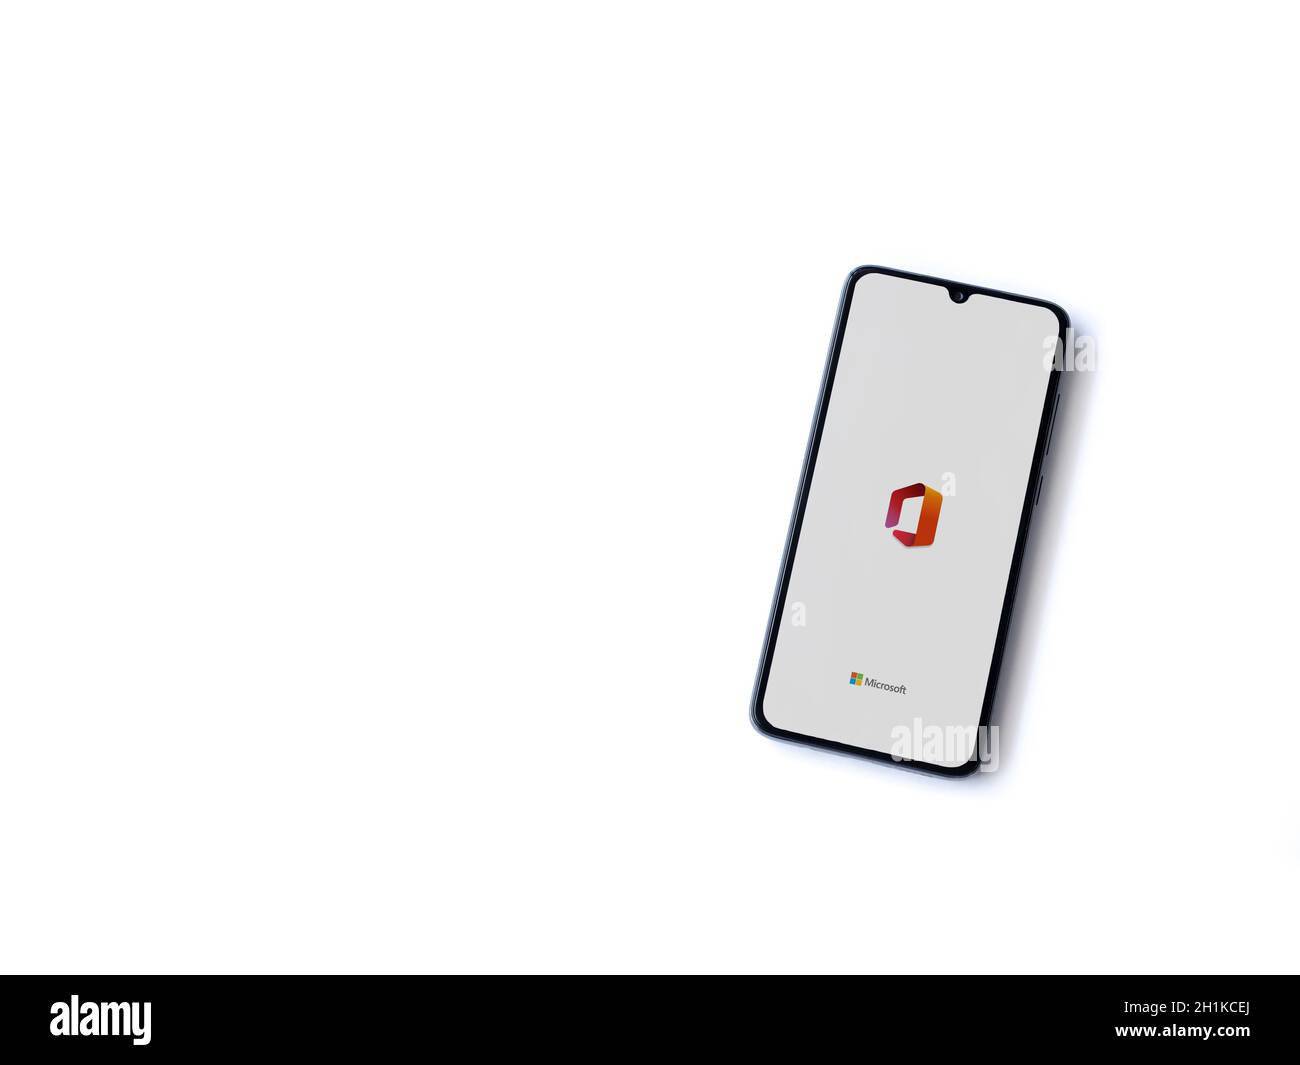 Lod, Israel - July 8, 2020: Microsoft Office app launch screen with logo on the display of a black mobile smartphone isolated on white background. Top Stock Photo